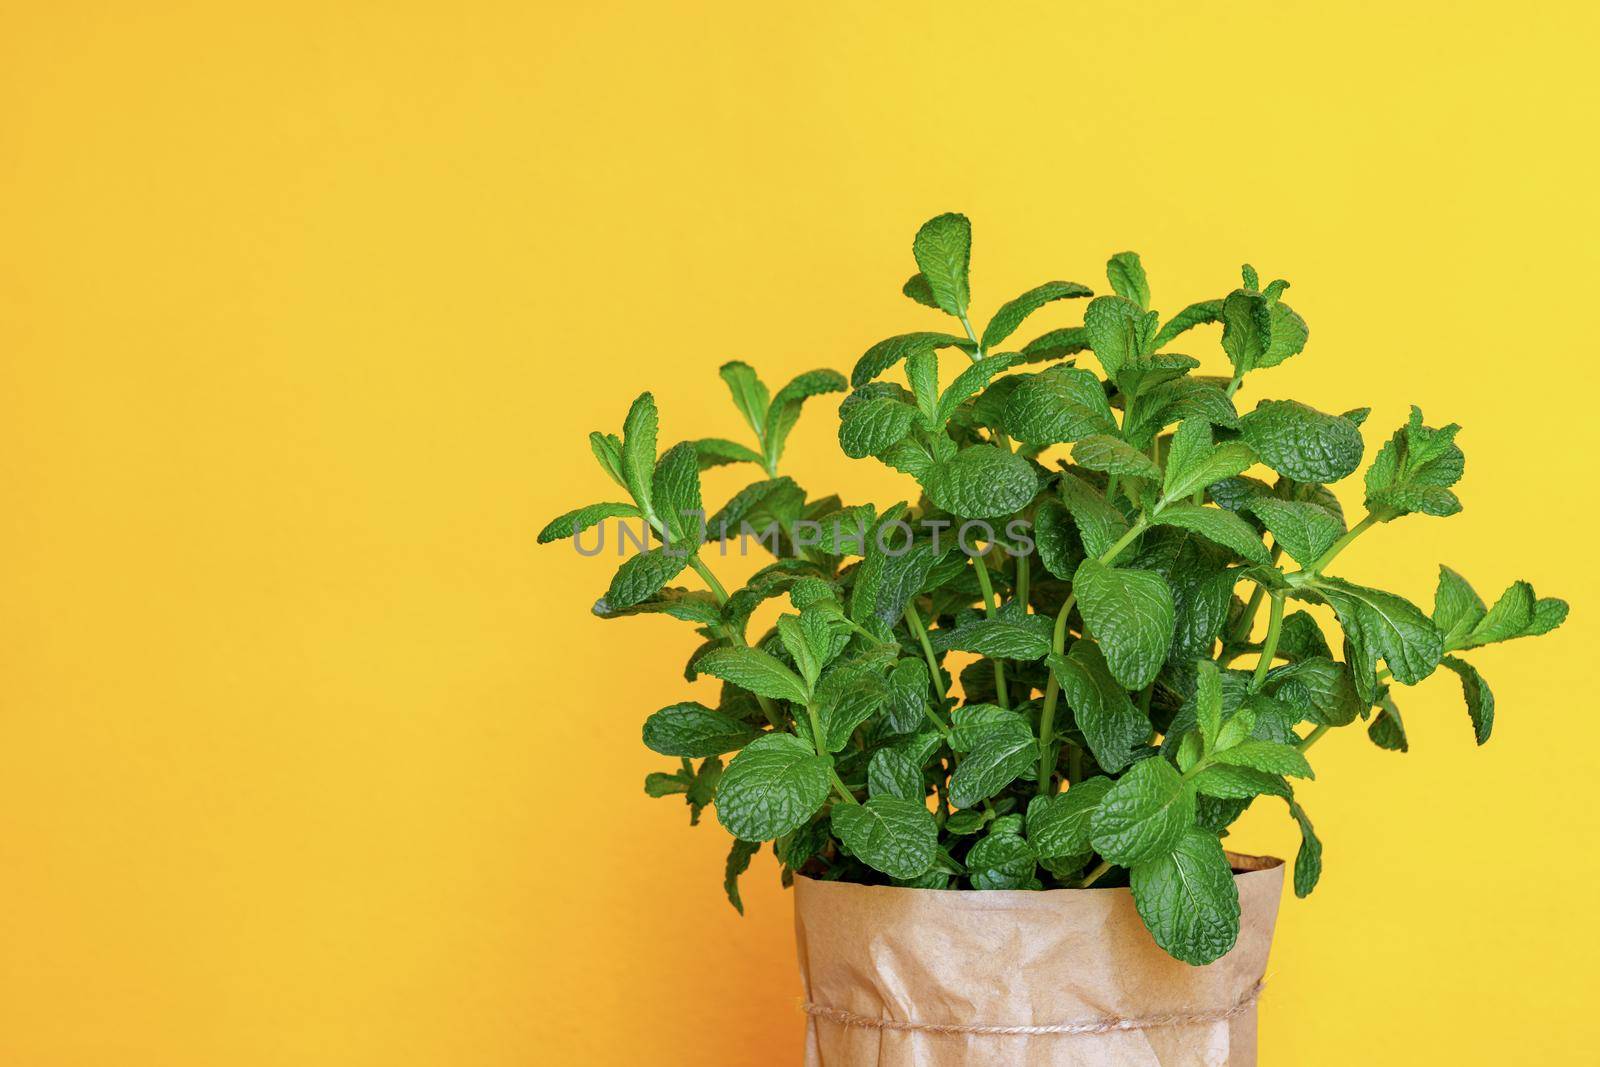 Bush of fresh green organic mint in a pot at yellow background. Peppermint growing at home